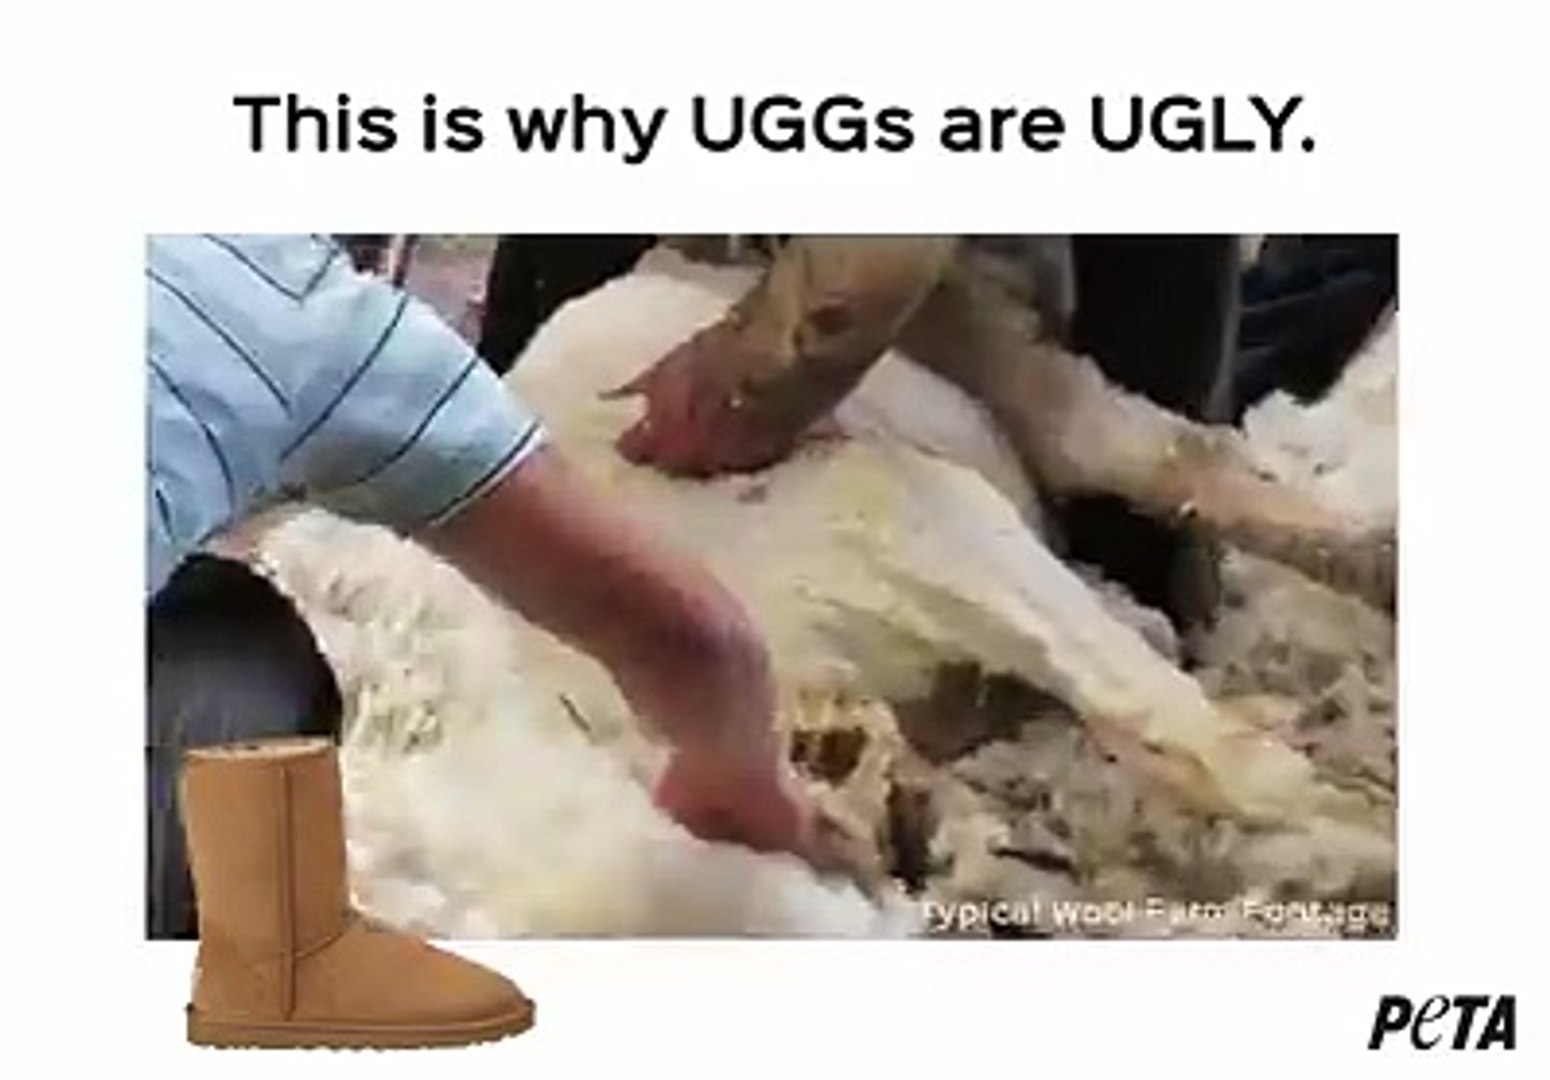 This is why UGGs are ugly - video 